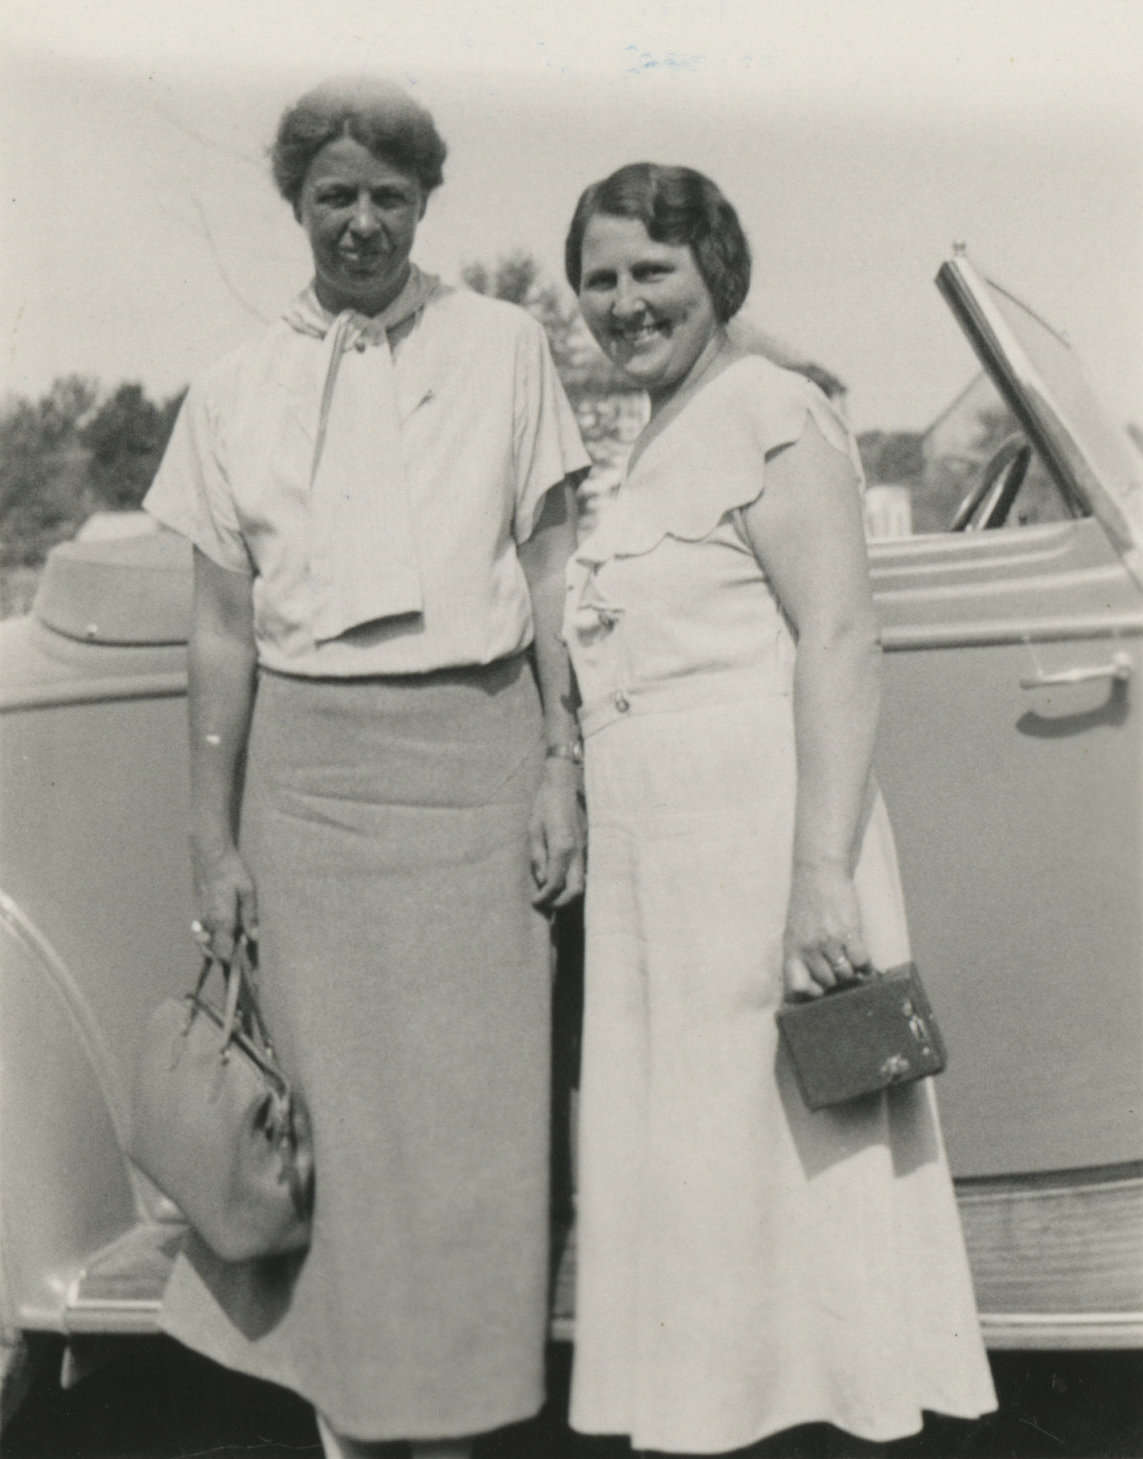 Eleanor with Lorena Hickok in 1933 credit Franklin D Roosevelt Library